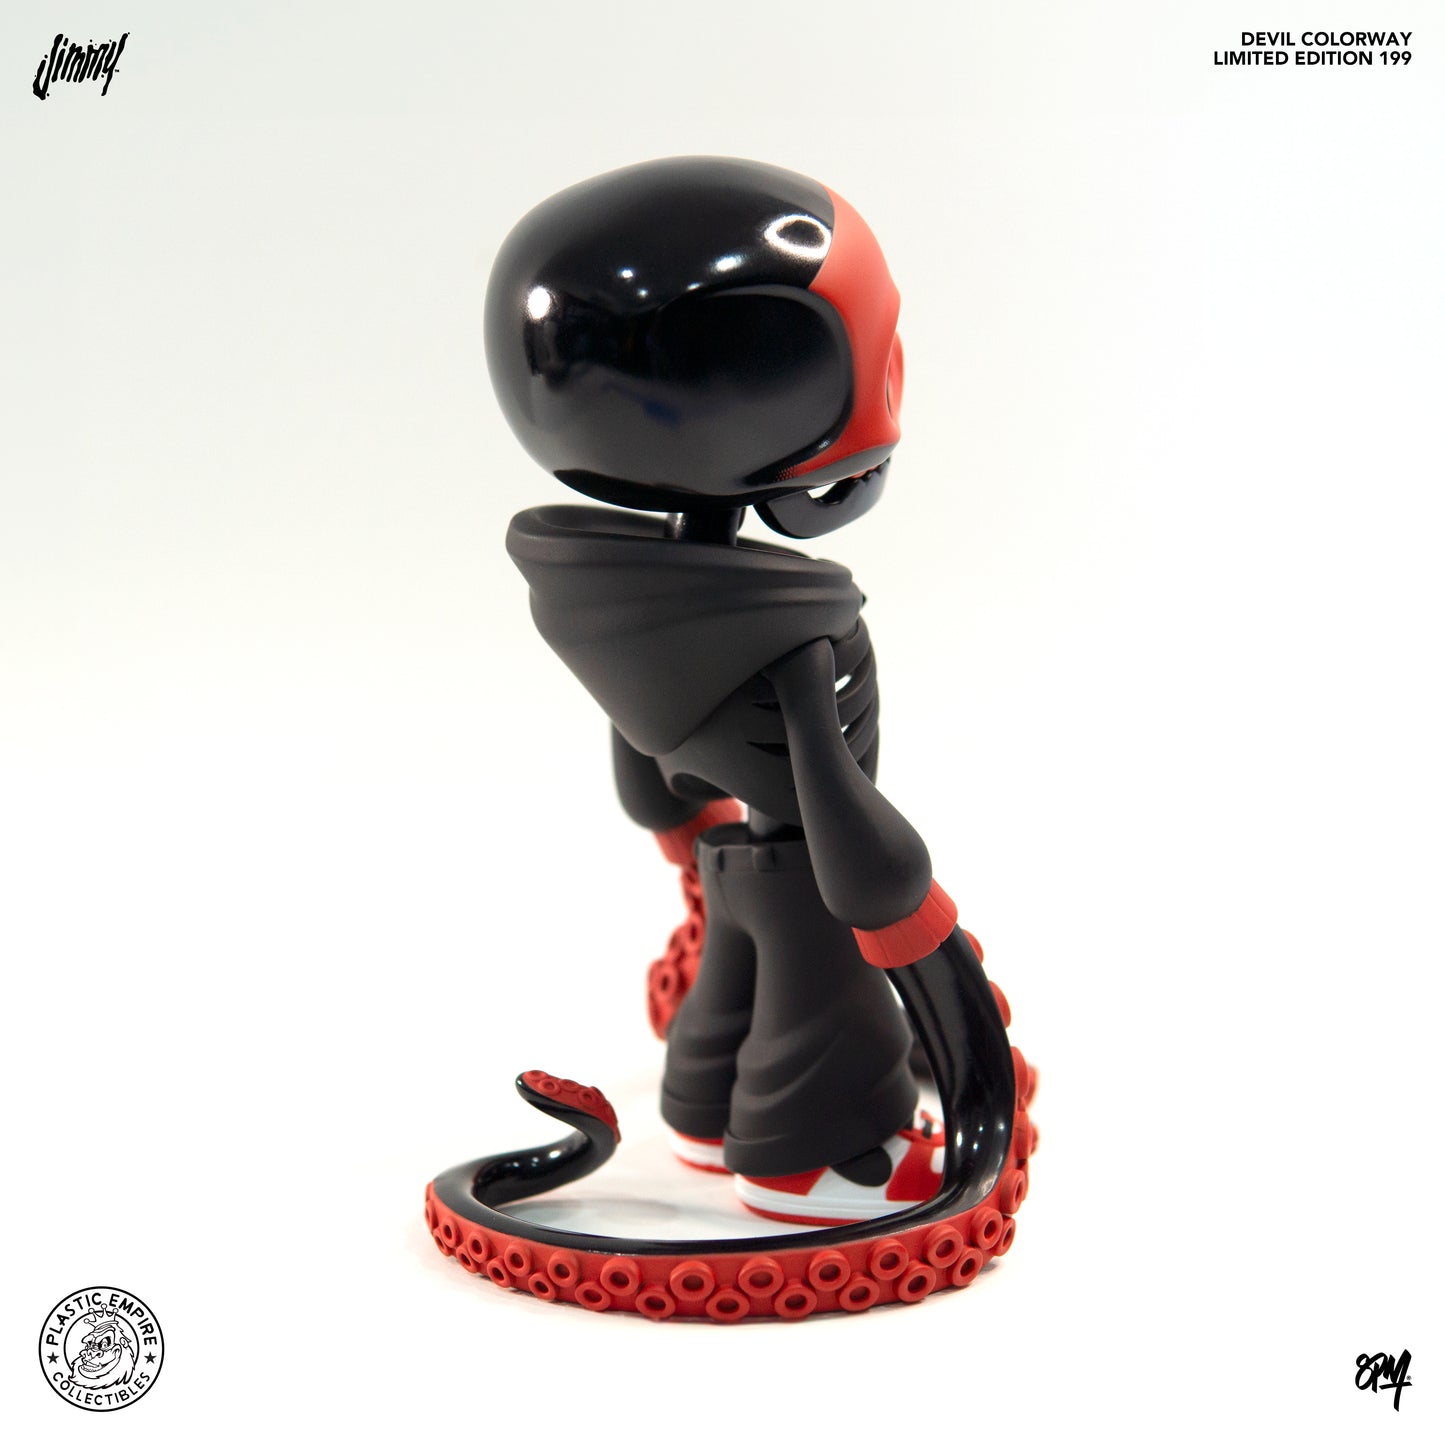 JIMMY VINYL 8" DEVIL COLORWAY BY 8PM PLASTIC EMPIRE NYCC EXCLUSIVE FIGURE